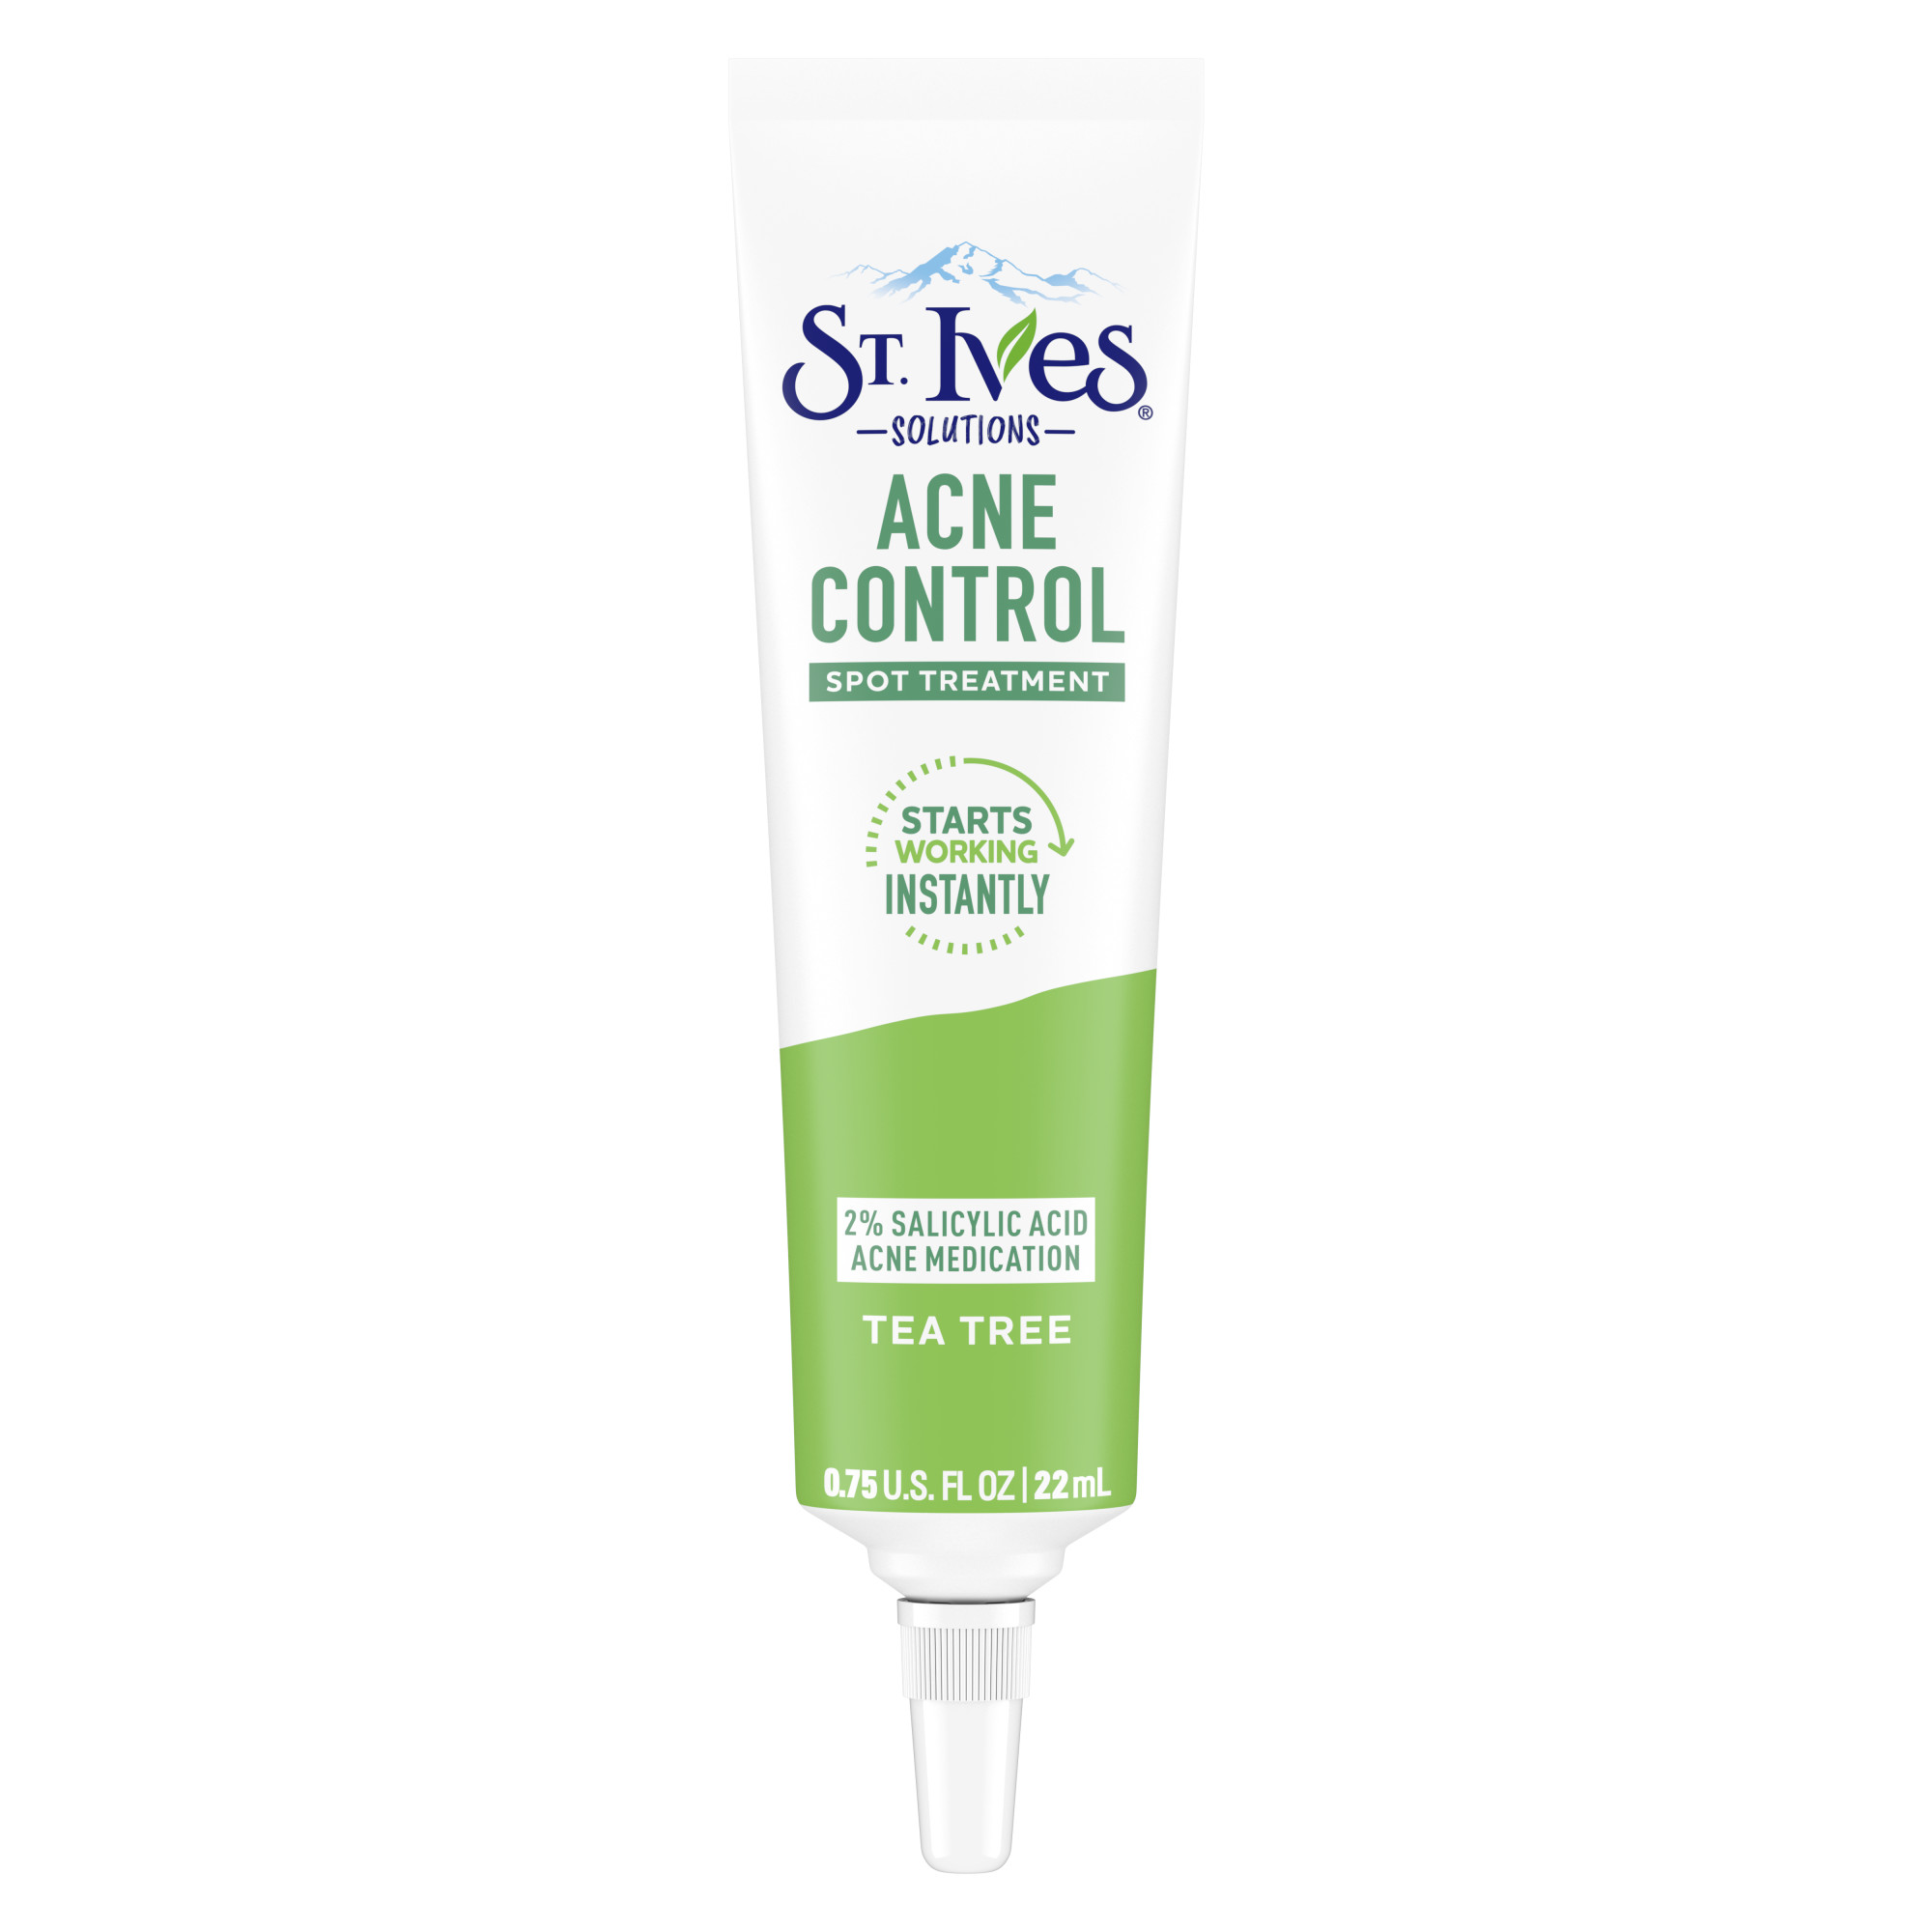 St. Ives Solutions Spot Treatment For Blemish Redness Reduction Acne Control Made with 2% Salicylic Acid and 100% Natural Tea Tree Extract 0.75 oz - image 12 of 16